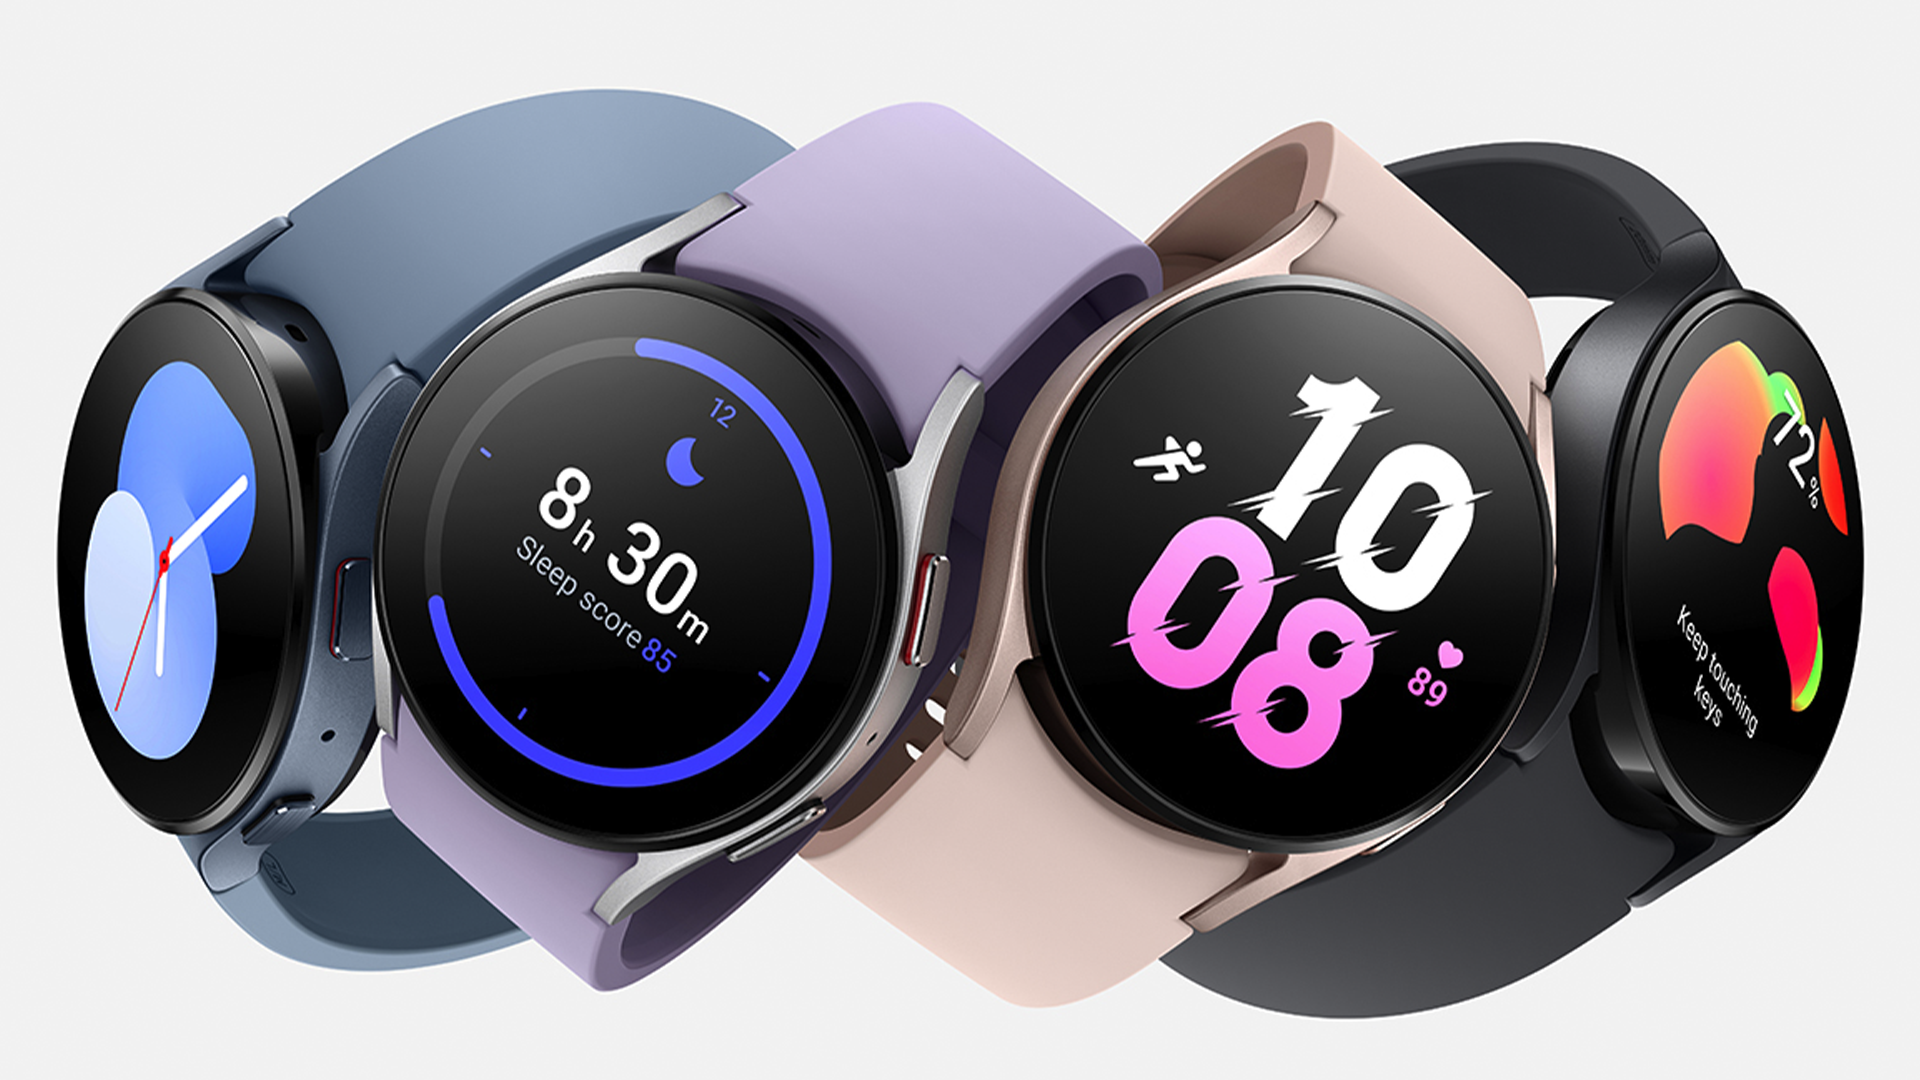 Samsung smart watch and phone compatibility